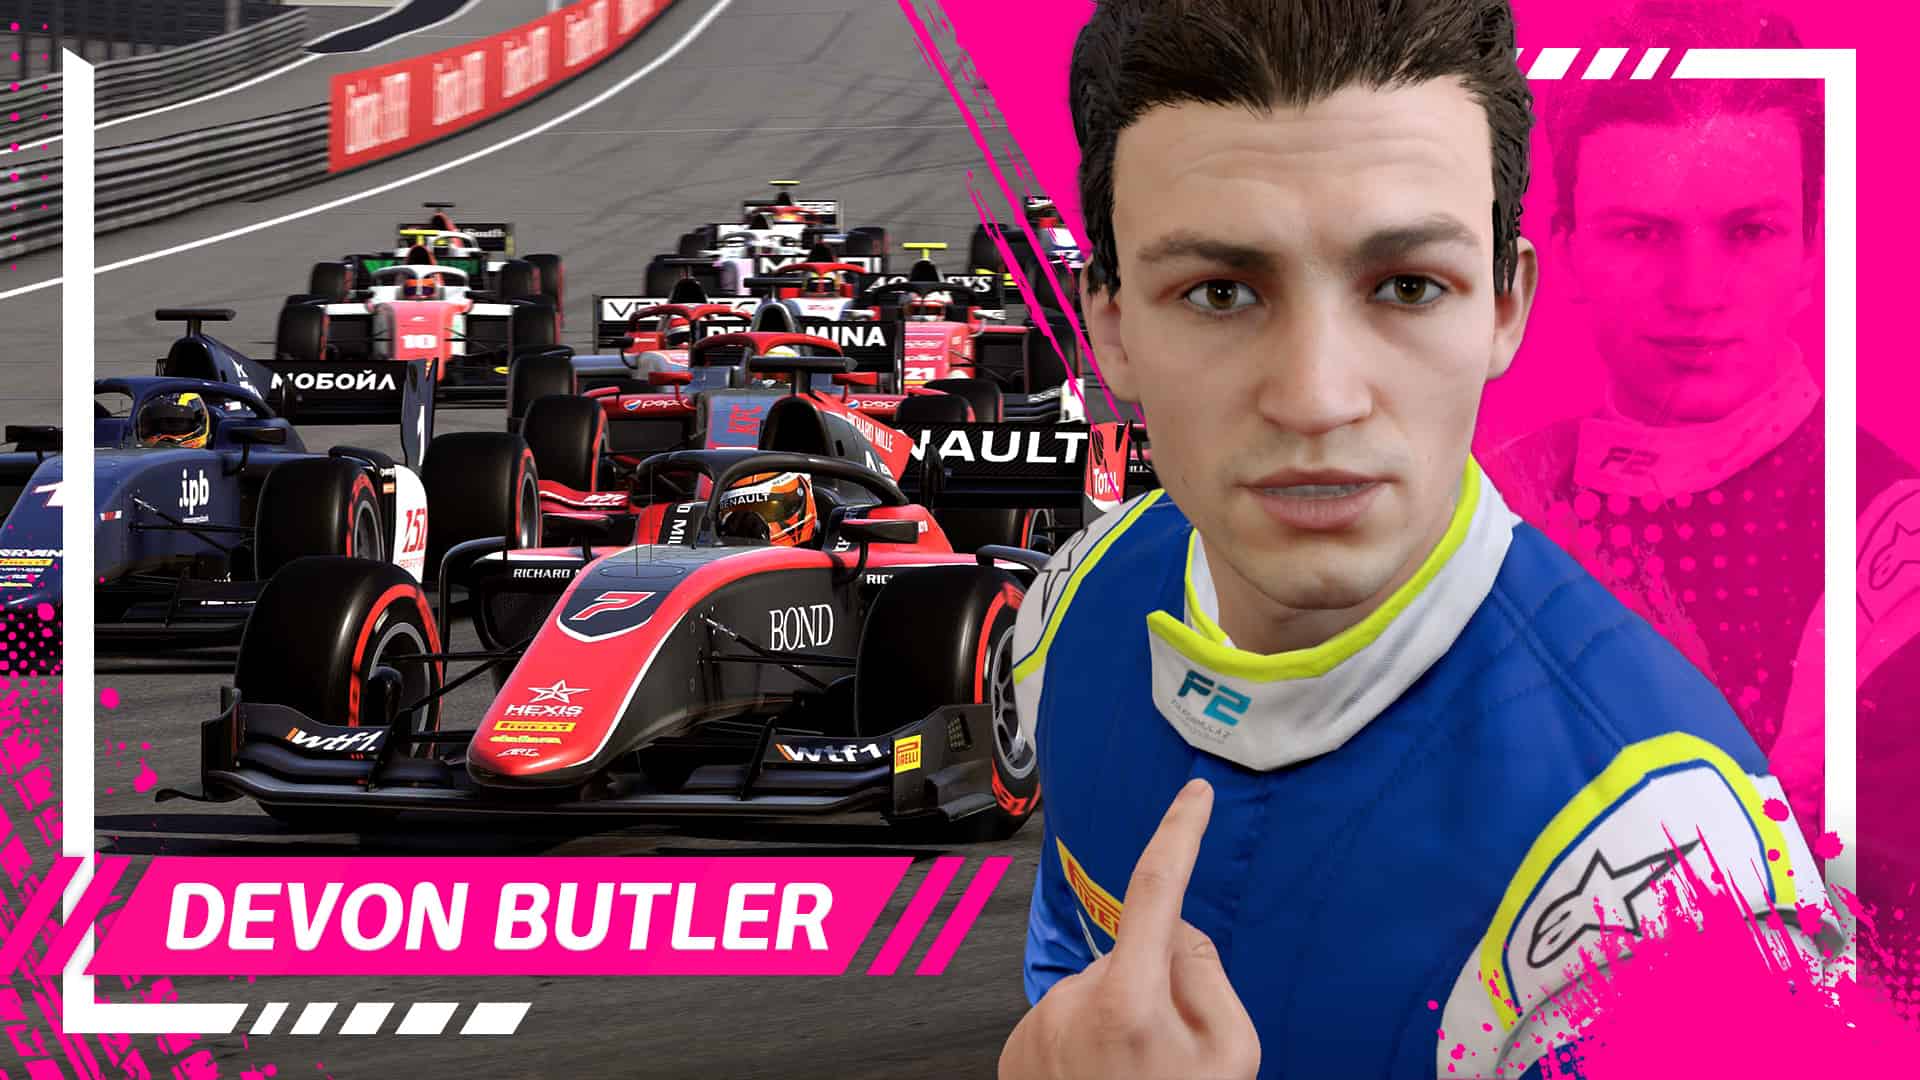 F1 2021 - F1 2021 Official Game From Codemasters Electronic Arts _ Jun 16, 2021 · f1 2021 will launch on july 16 across playstation 4/5, xbox one/series, and pc through steam, with three days’ early access for digital deluxe edition preorders.the ps5 and xbox series versions offer enhanced graphics, quicker loading times, and more detailed damage and force feedback models.